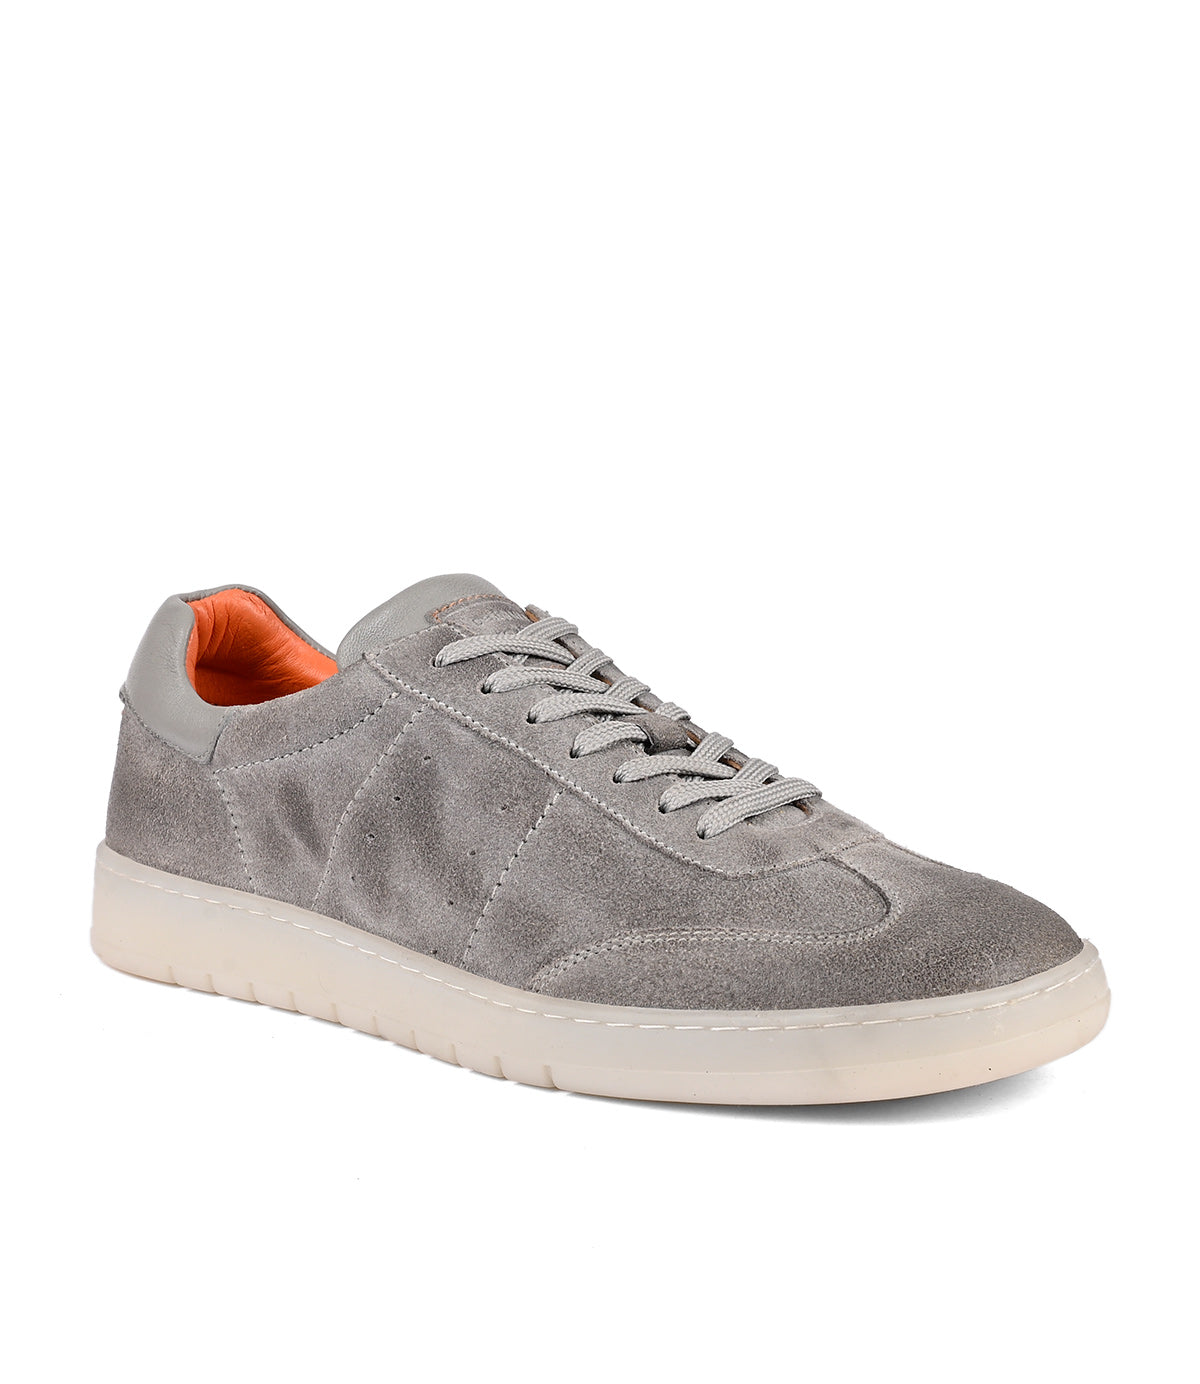 Gray soft suede leather sneaker with white sole by Roan Attitude.